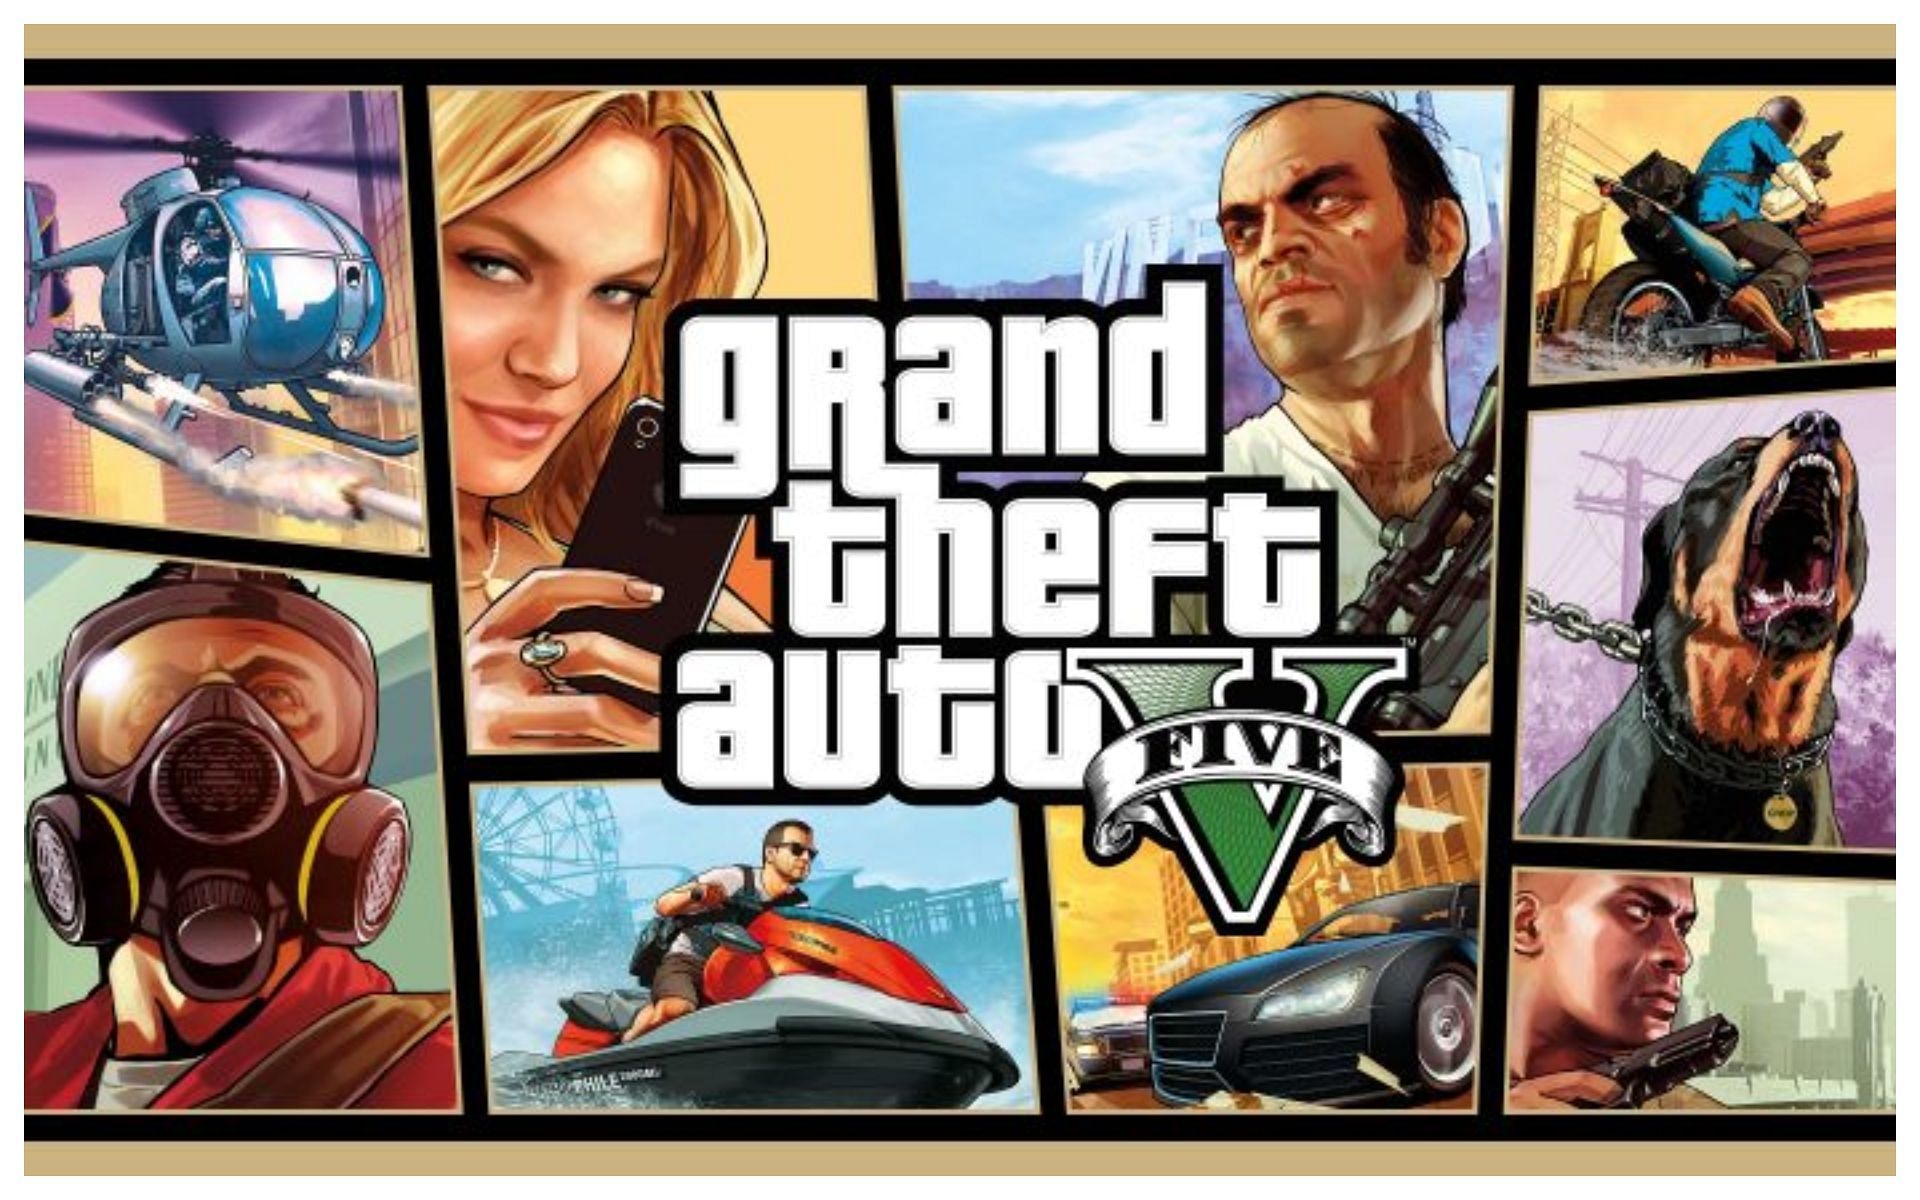 GTA 5 Expanded & Enhanced free money and other rewards